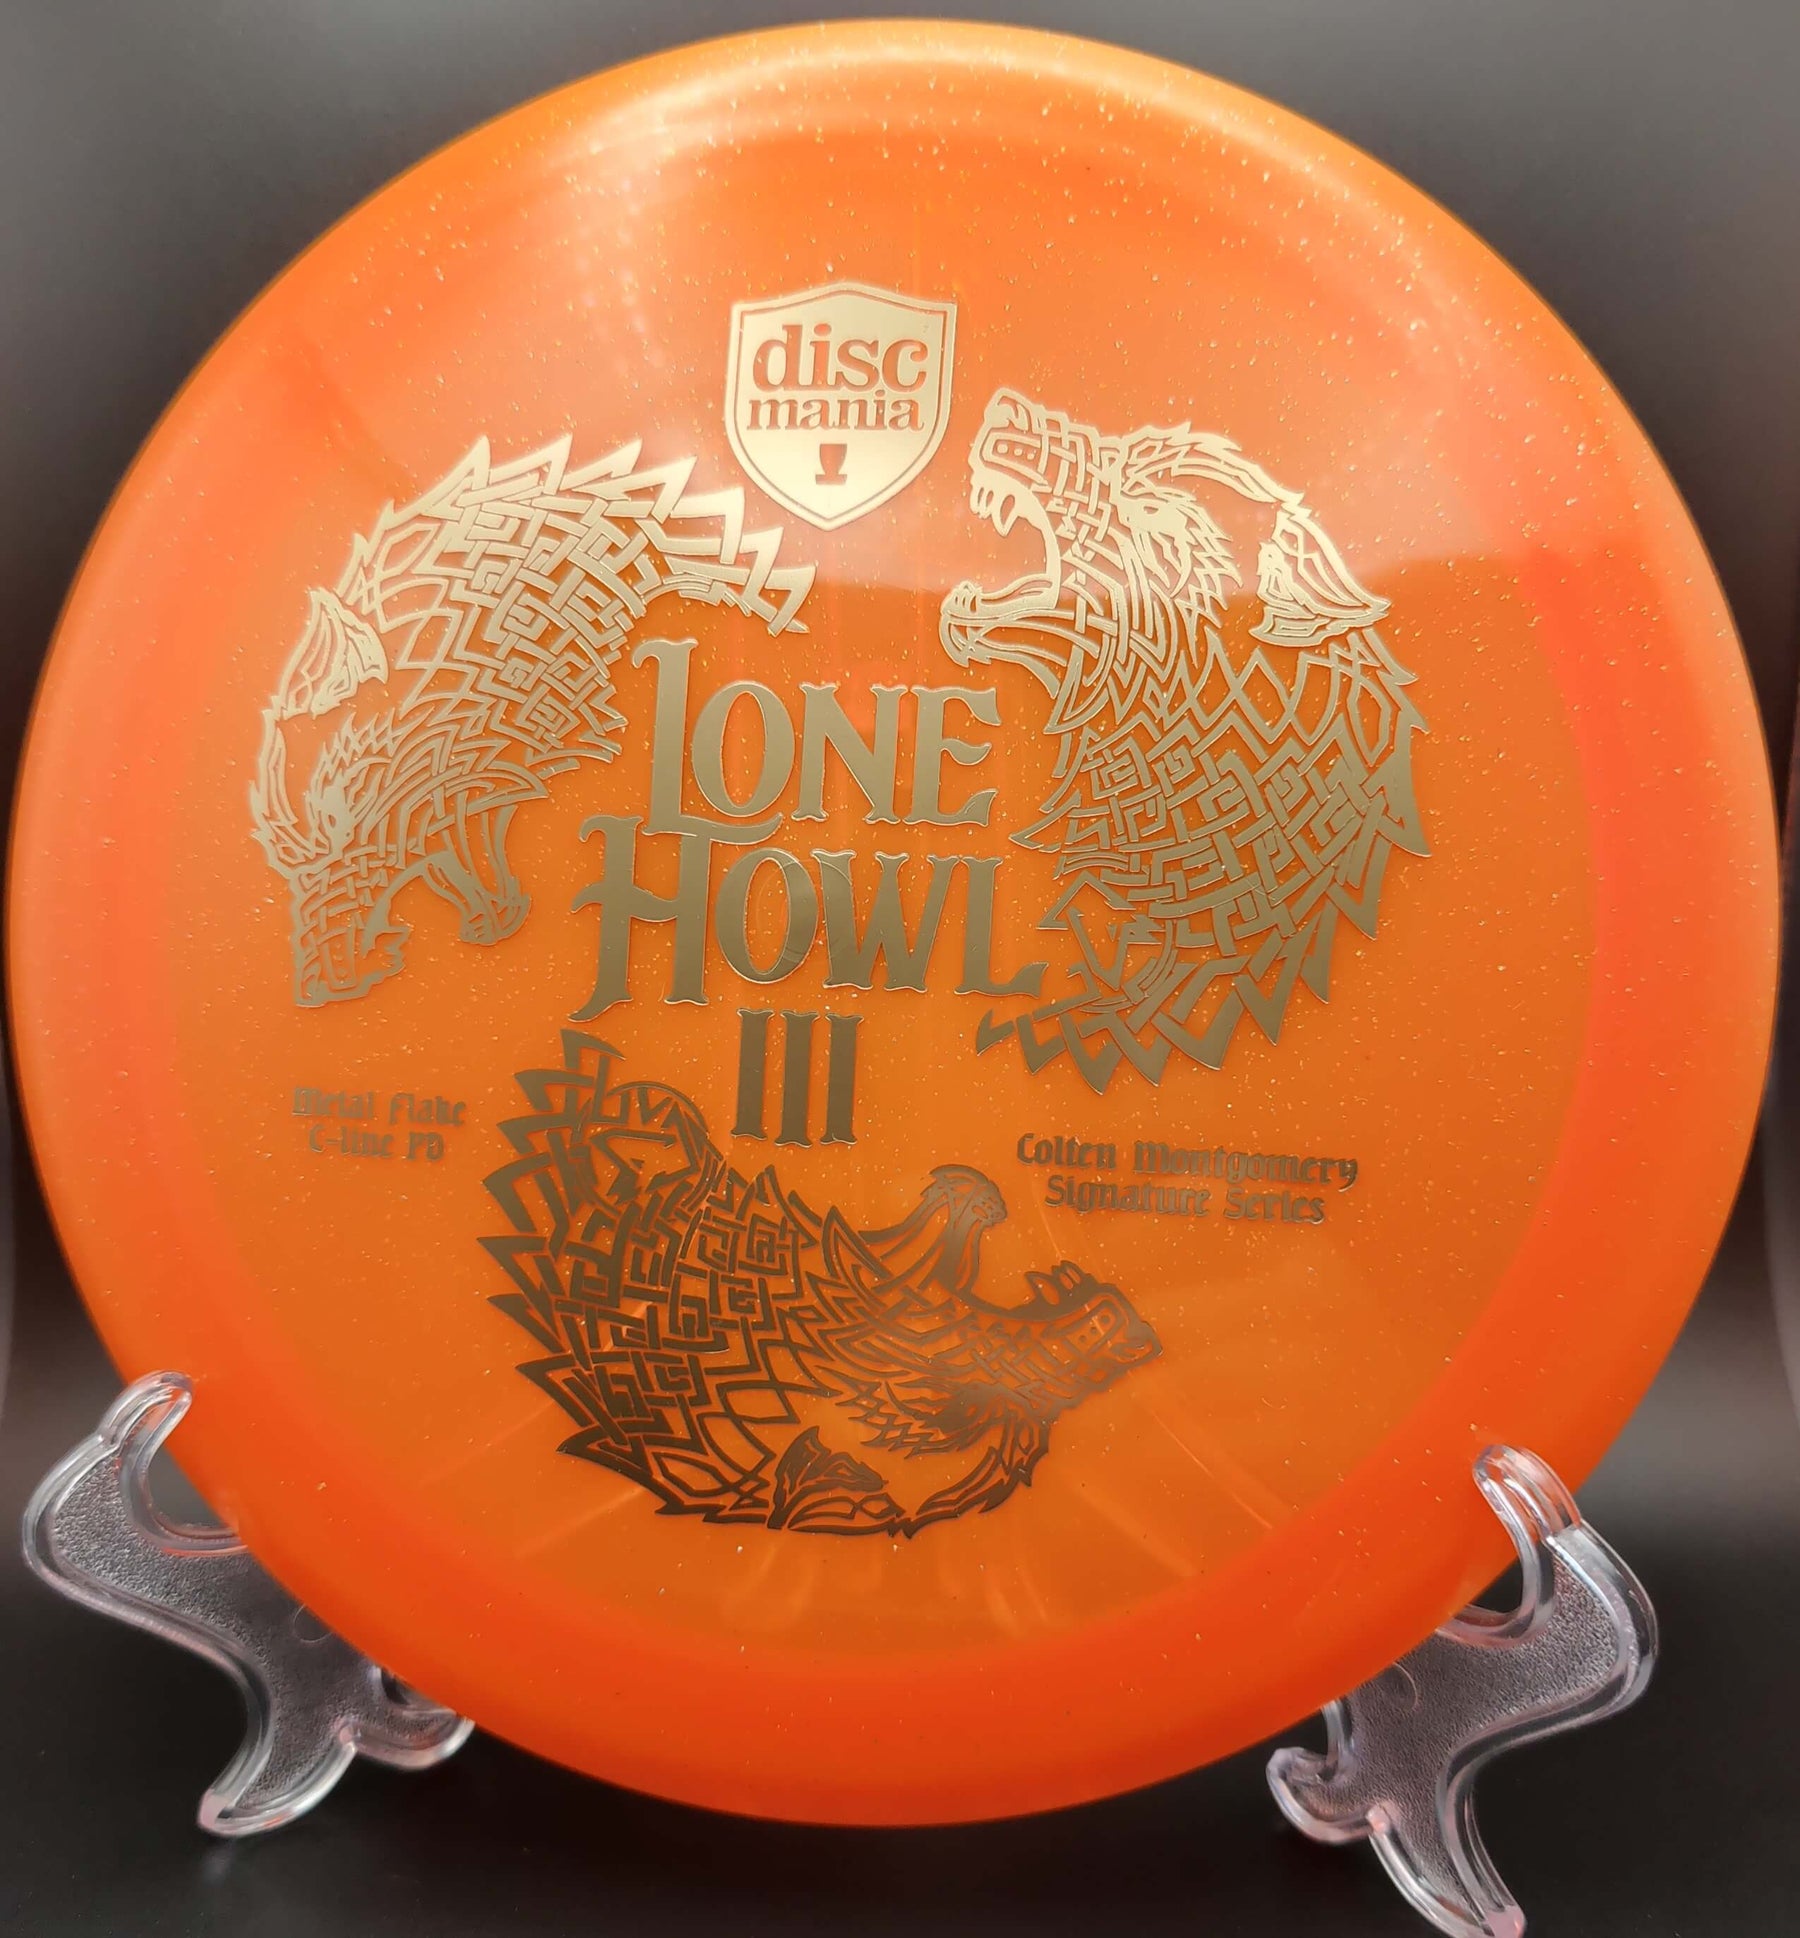 LONE HOWL 3 - COLTEN MONTGOMERY SIGNATURE SERIES METAL FLAKE C-LINE PD